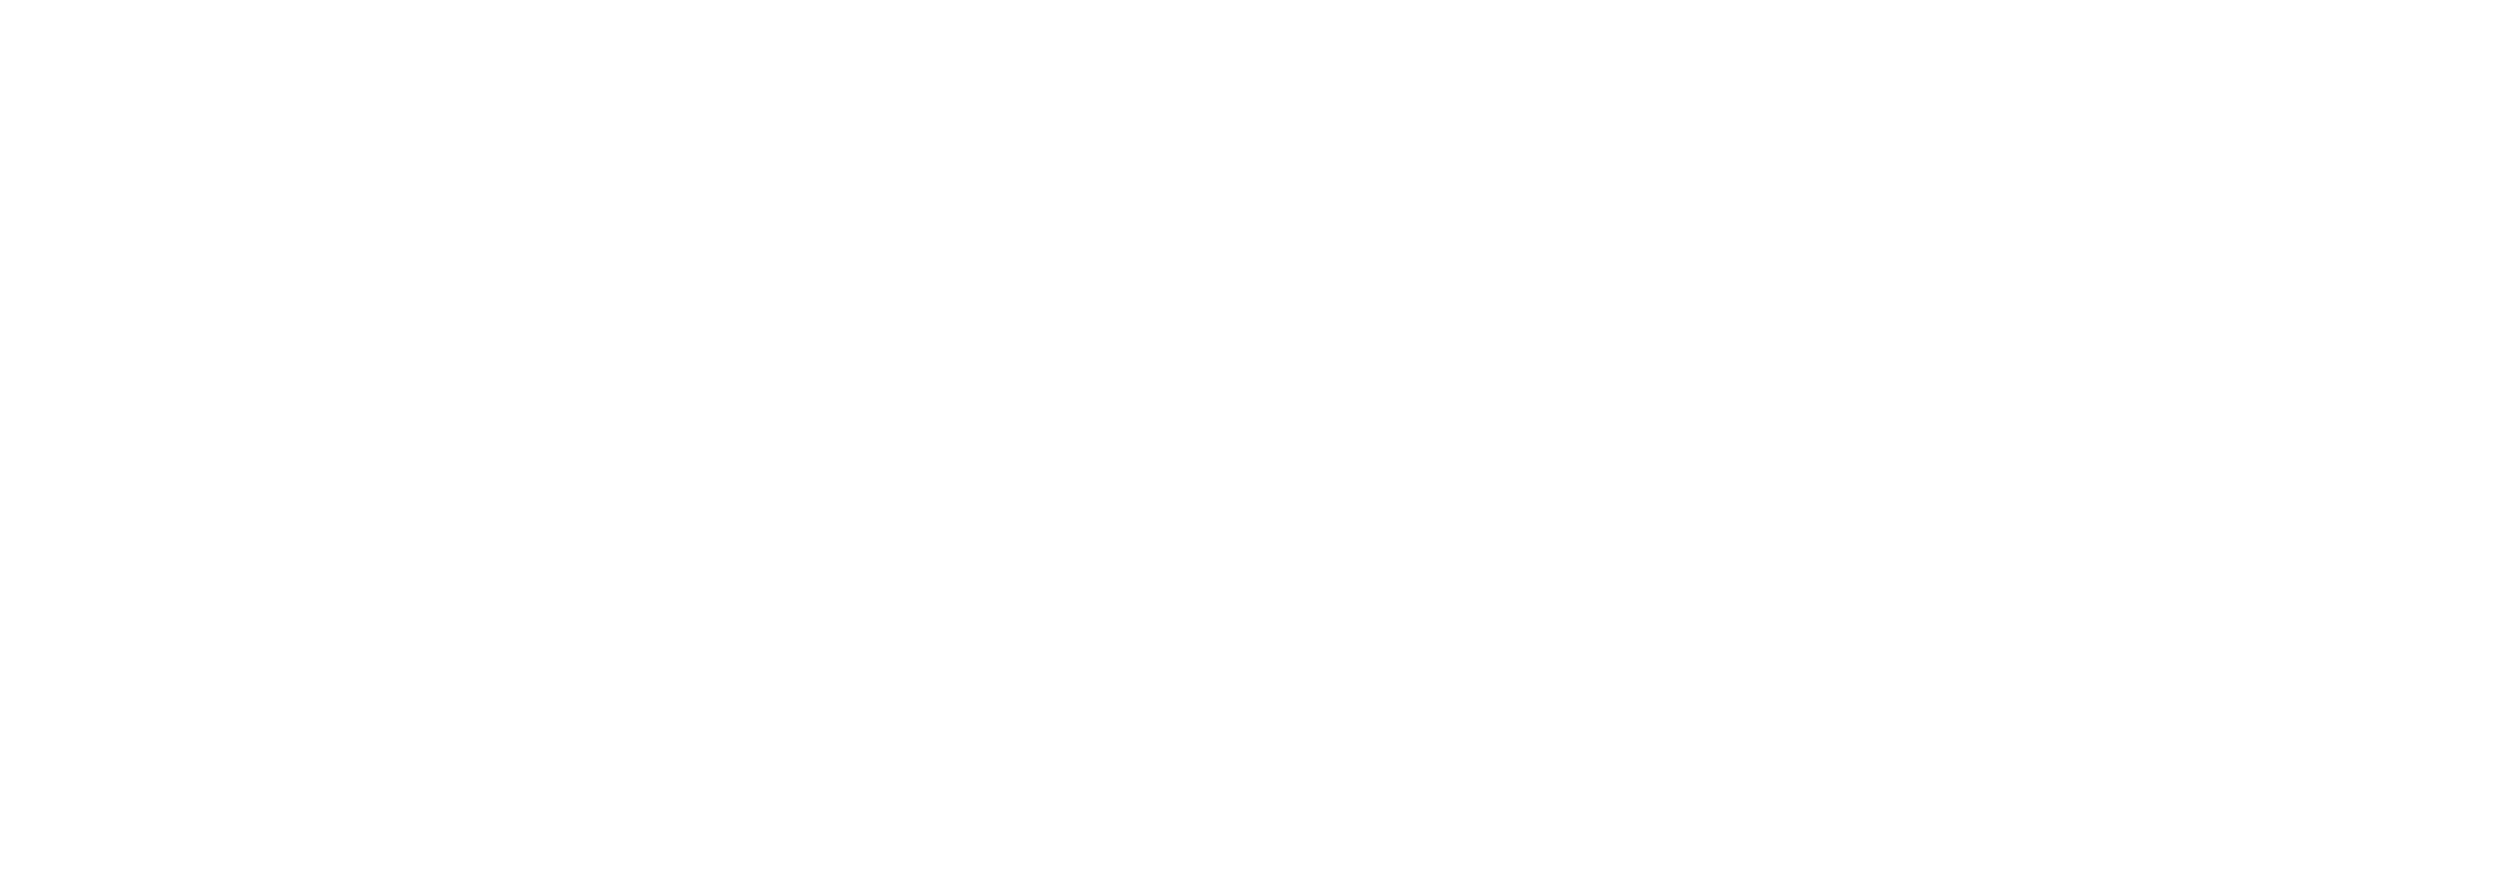 recycle906white-01.png